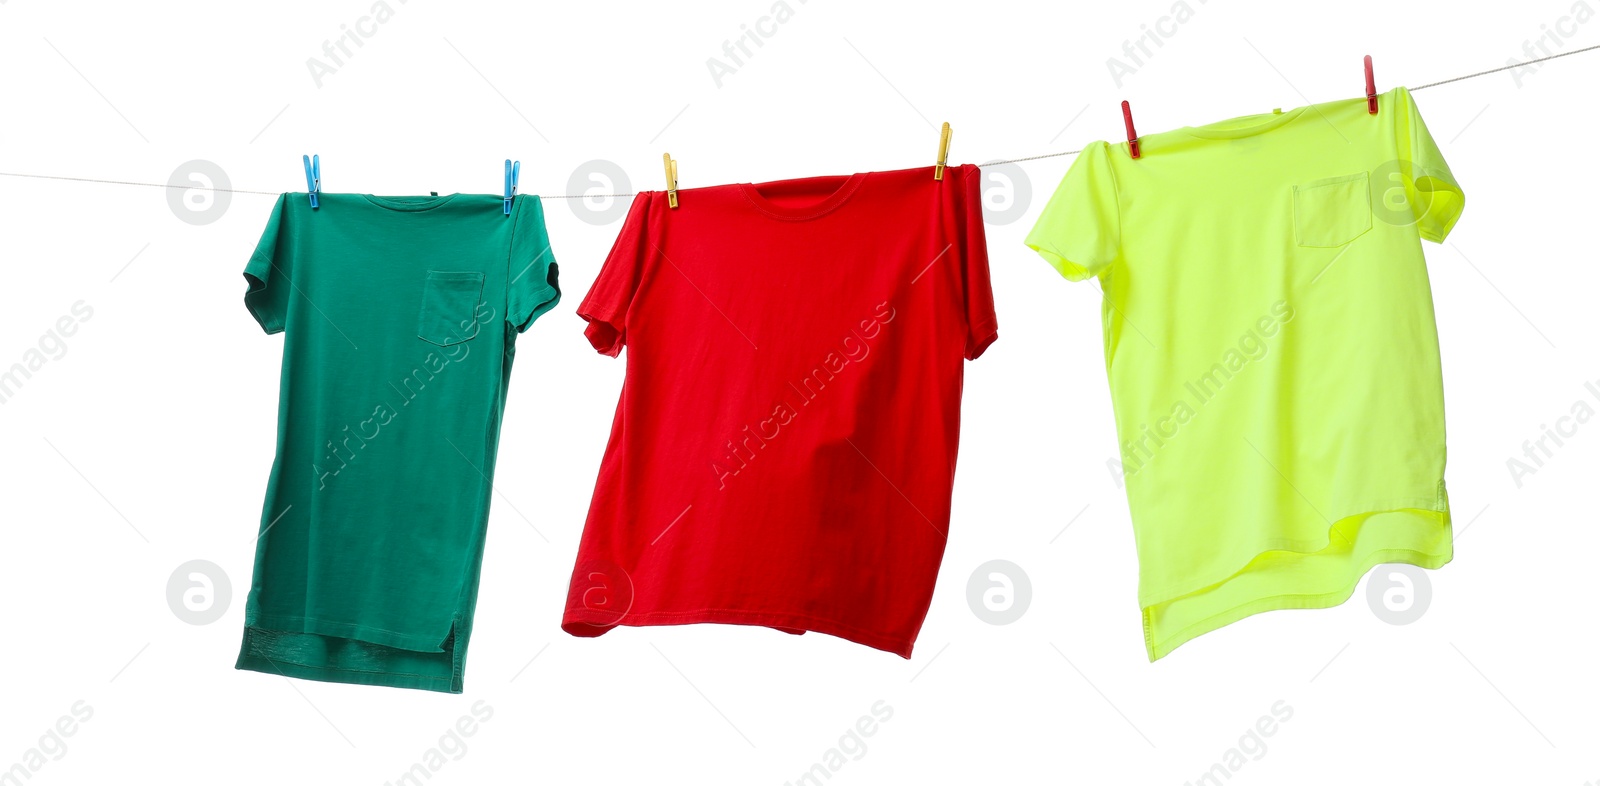 Photo of Colorful t-shirts drying on washing line isolated on white